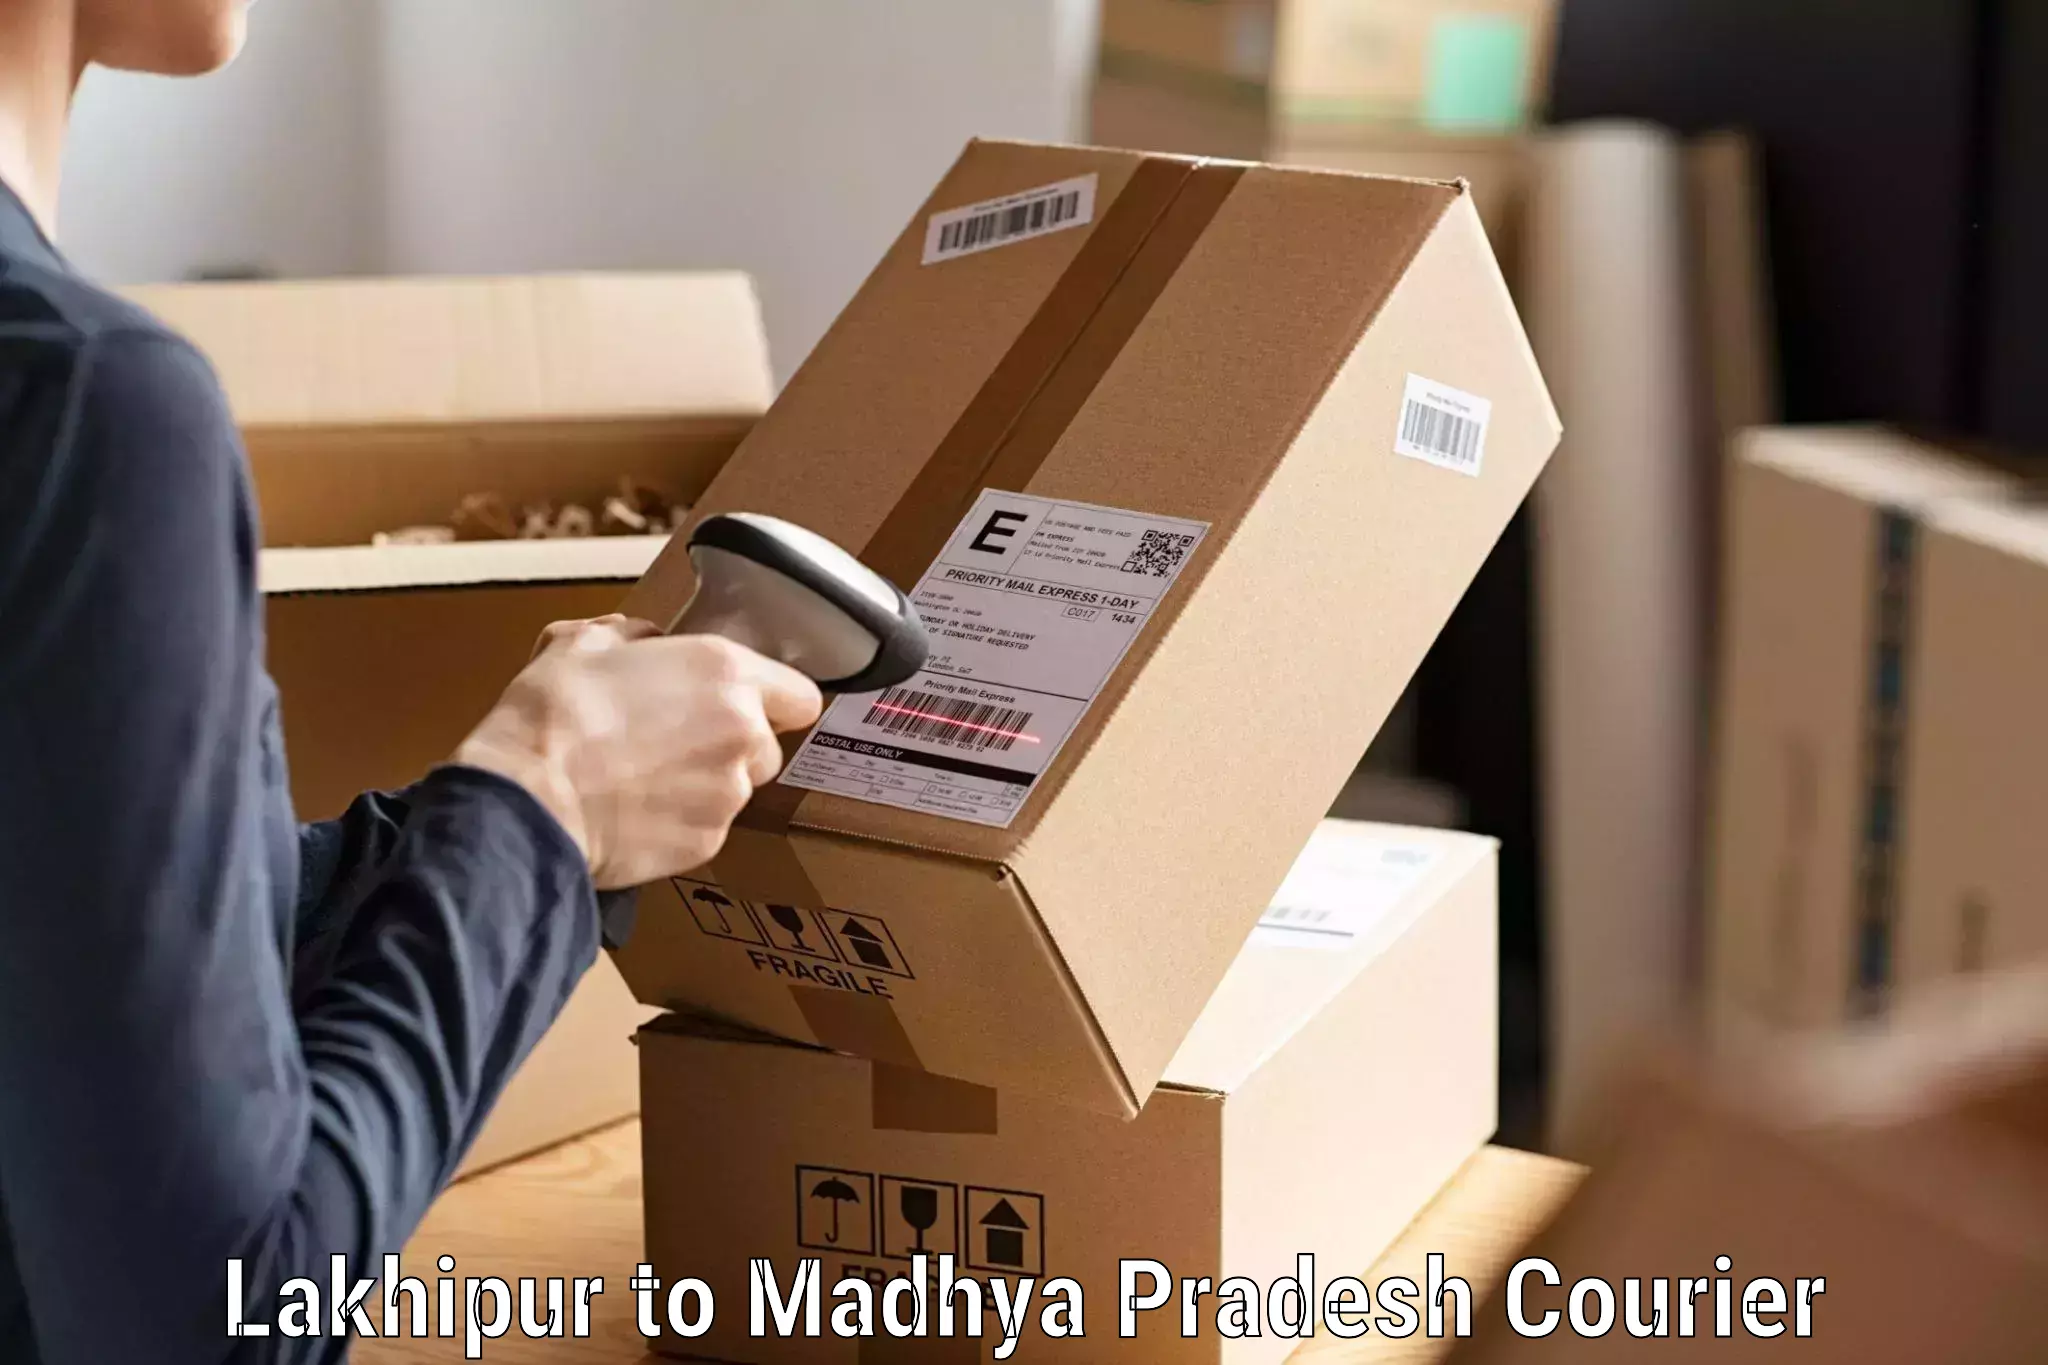 Express courier facilities Lakhipur to Maheshwar